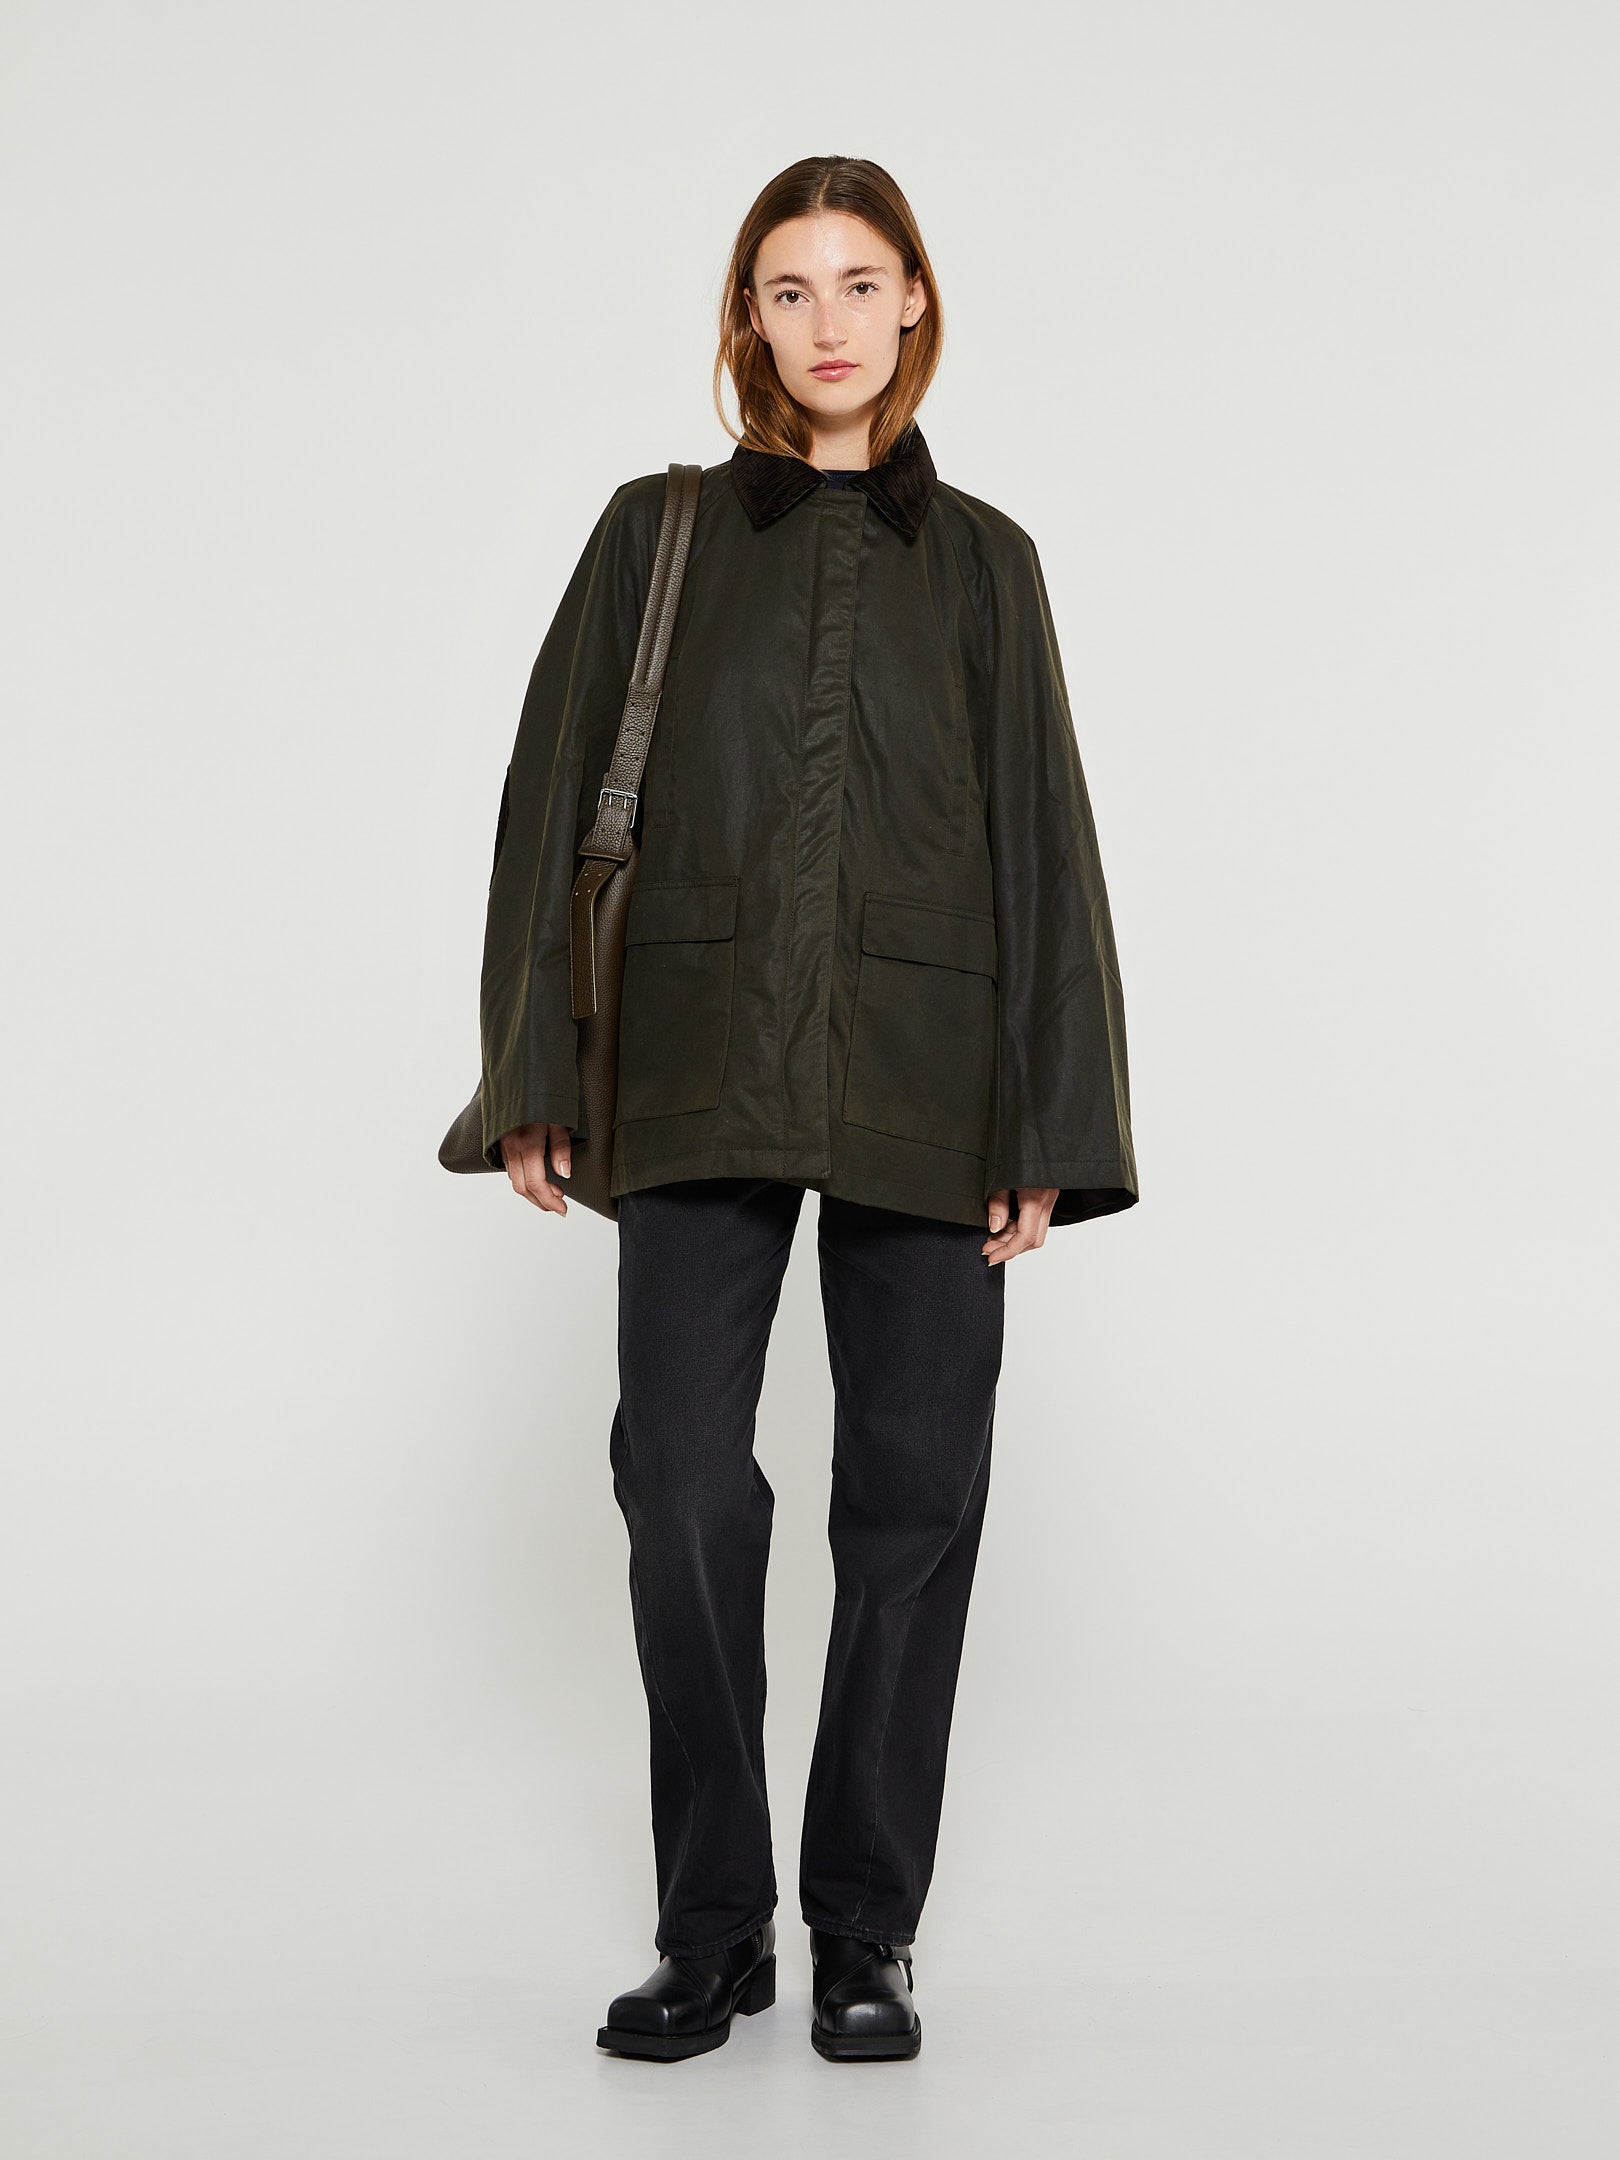 the Coats Shop at for selection stoy | Jackets & women